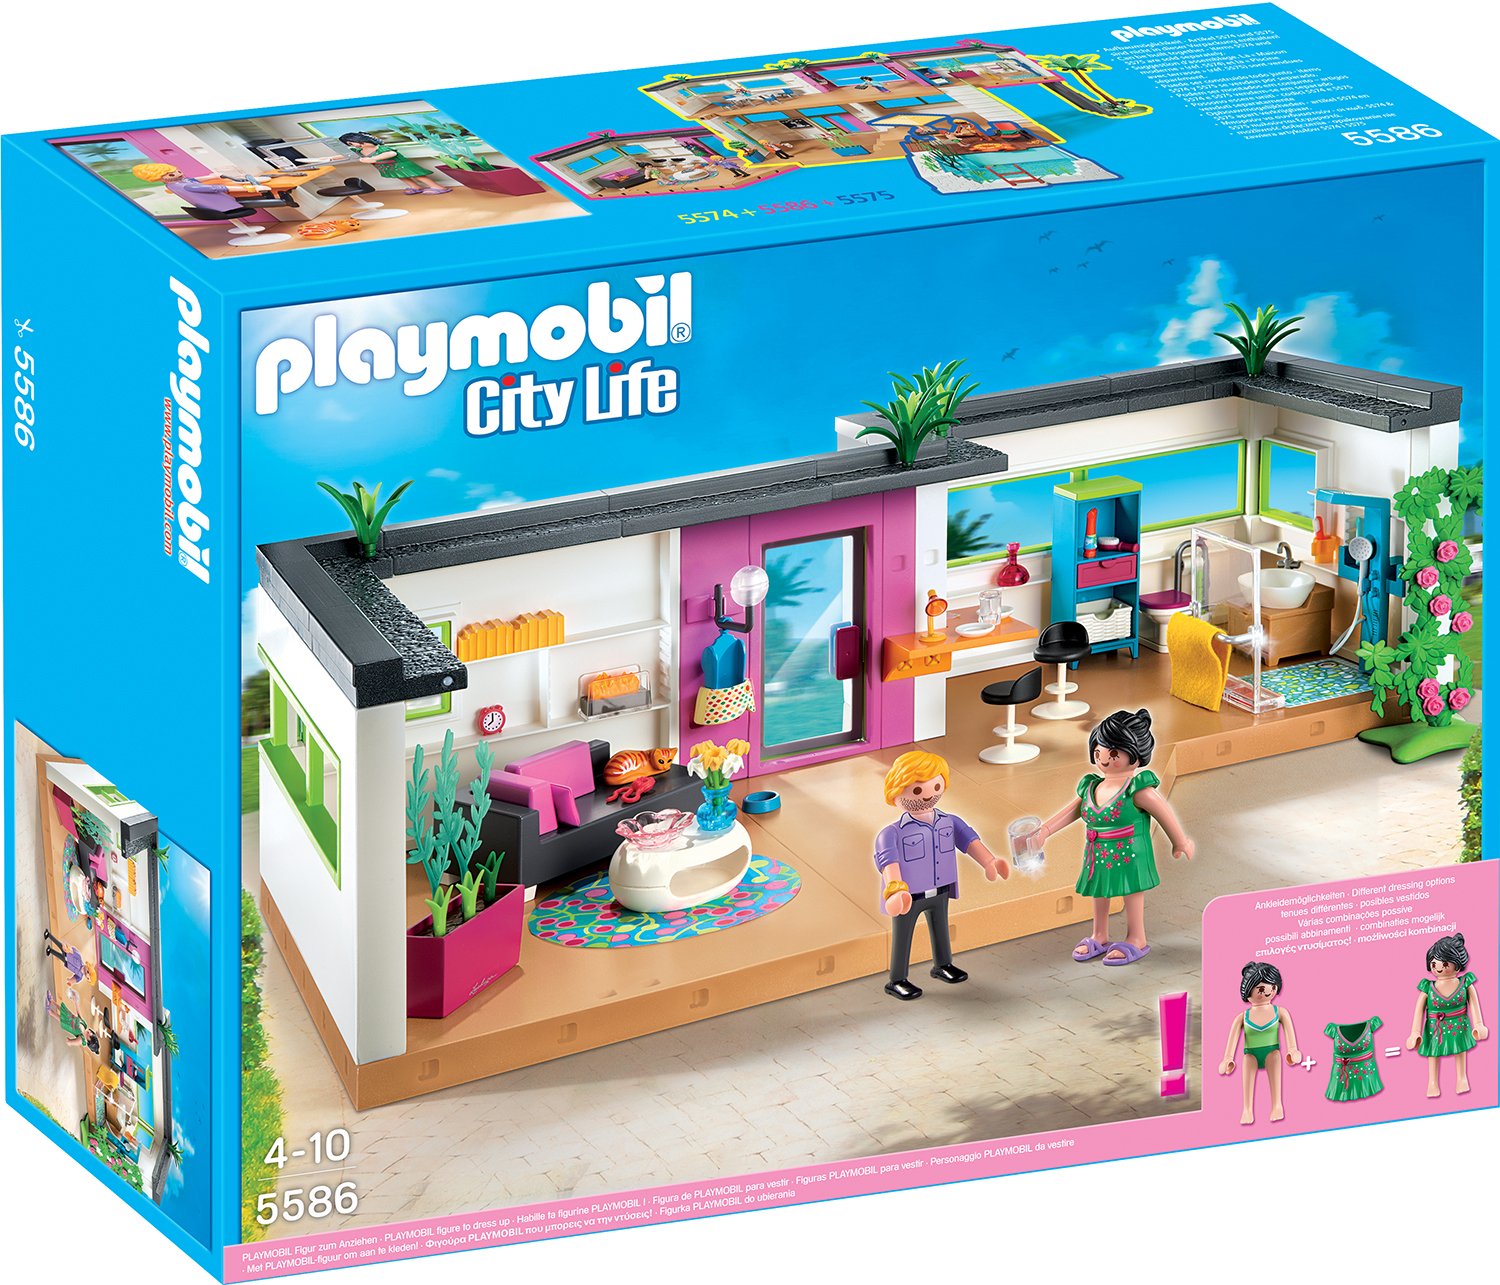 Playmobil City Life Guest Suite Playset